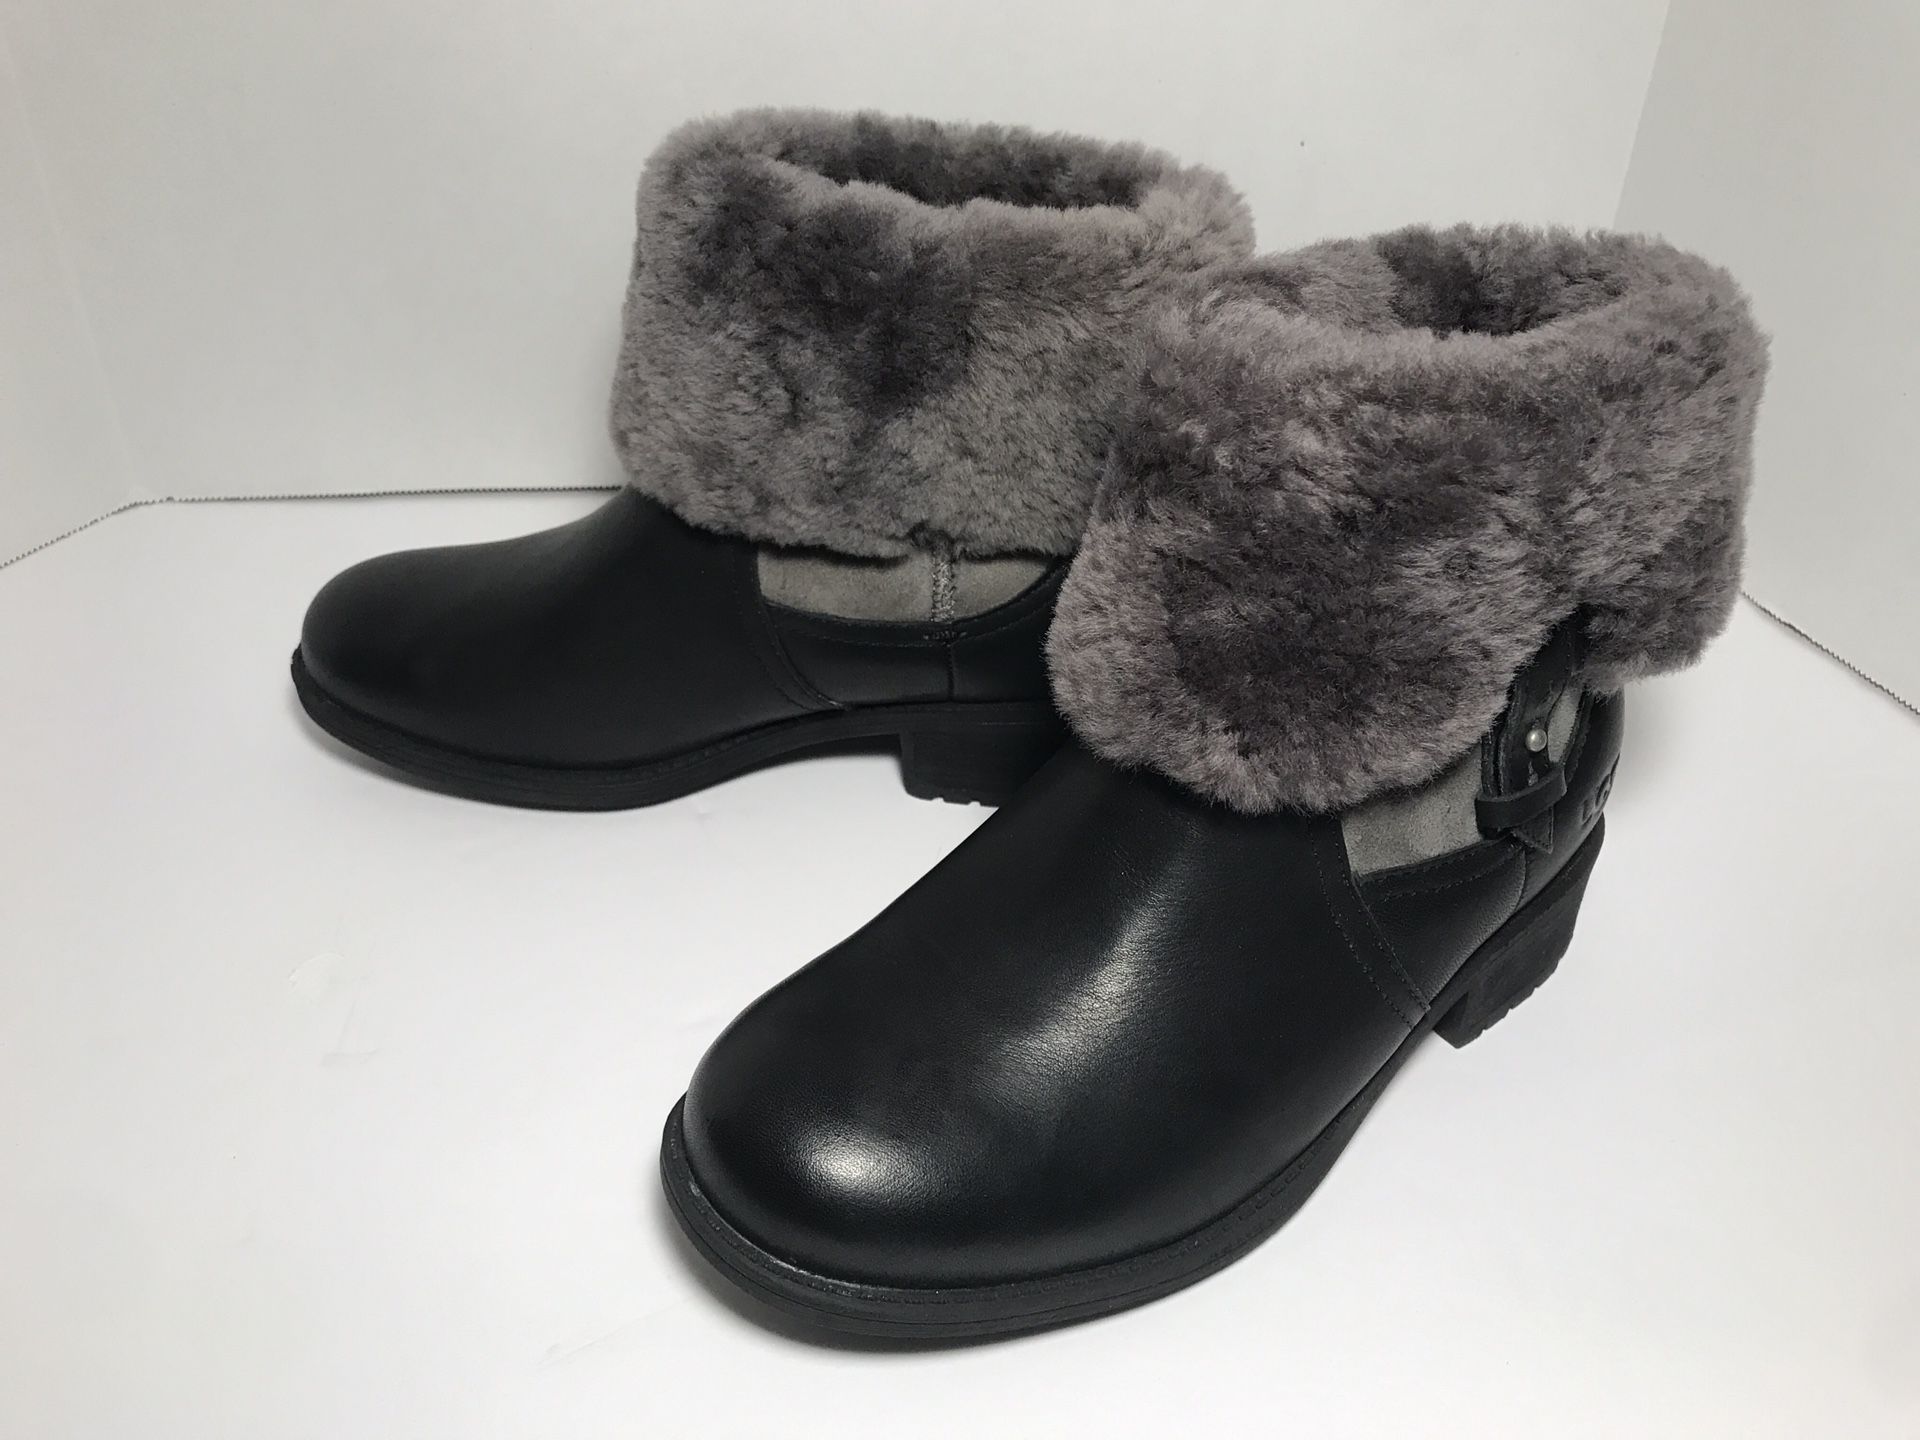 UGG CHYLER Boots size 5.5 US  S/N 1012524 W